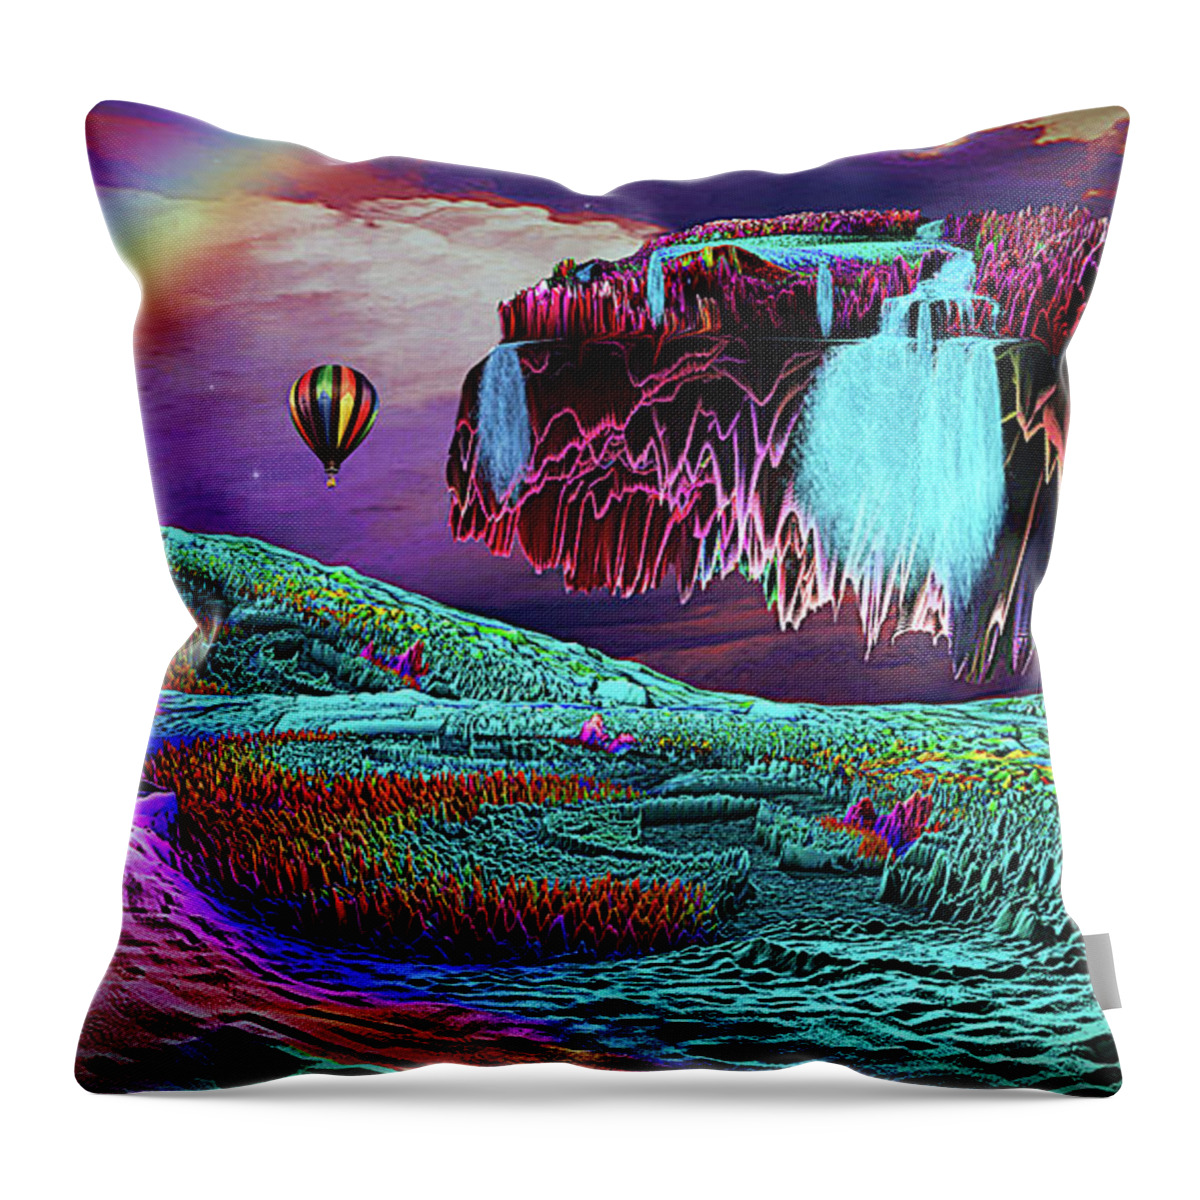 Art Throw Pillow featuring the digital art Balloon Adventure Over Neverend Isle by Artful Oasis